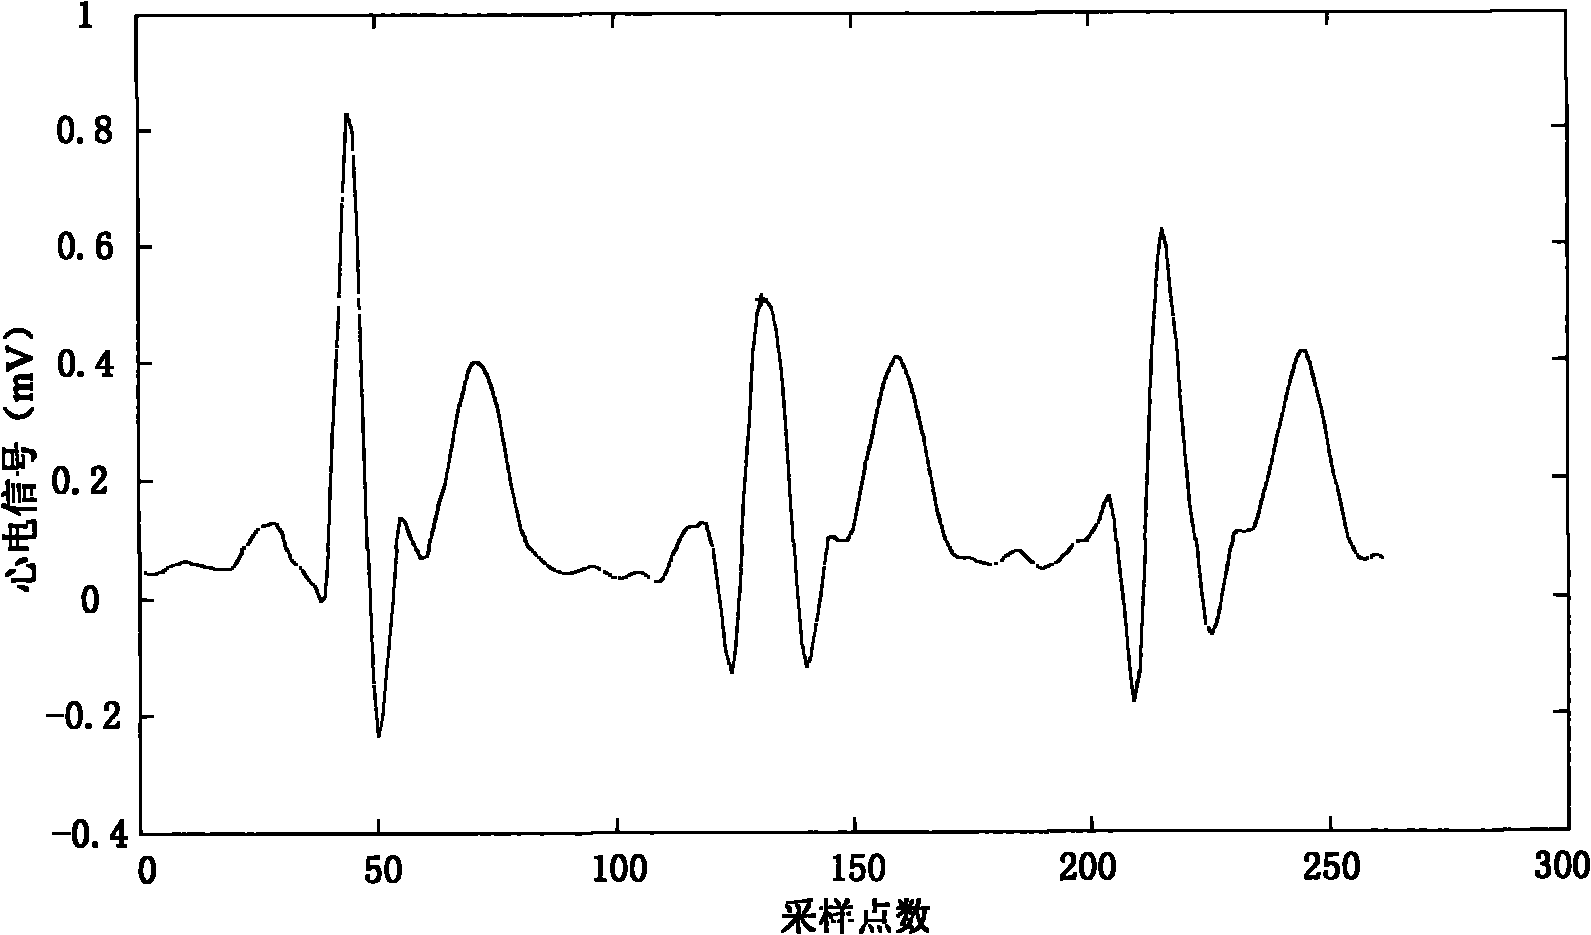 Method for detecting R wave crest of electrocardiosignal